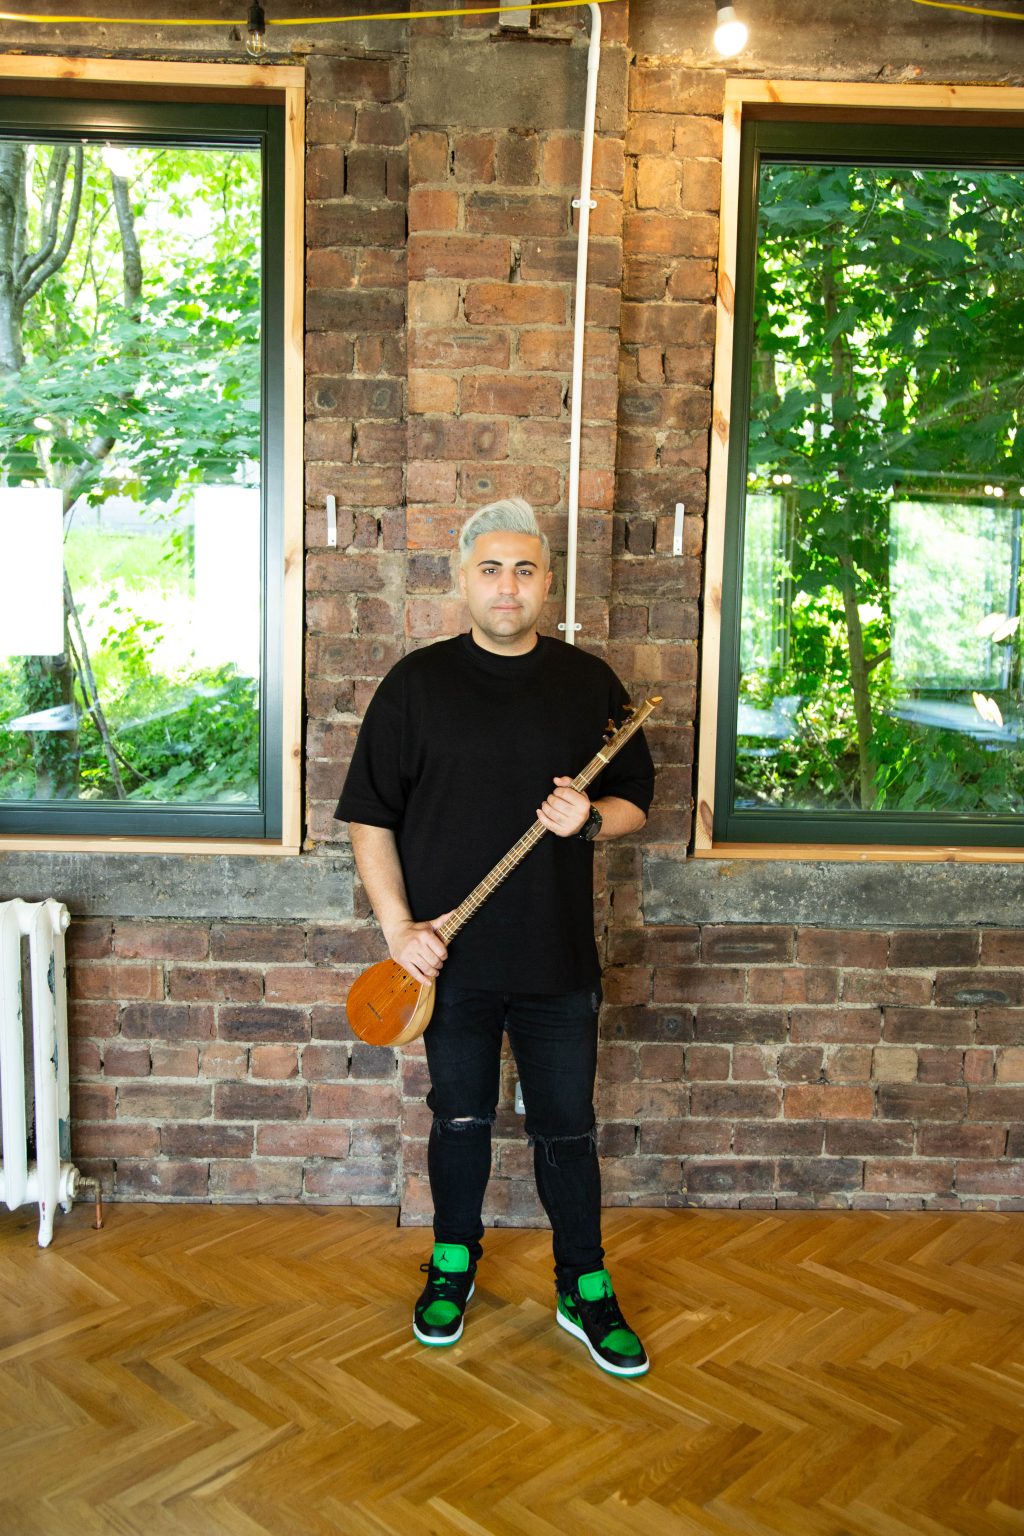 Aref stands in front of a brick wall. He is wearing a t-shirt and jeans and colourful runners. He faces the camera holding a string instrument in both hands.